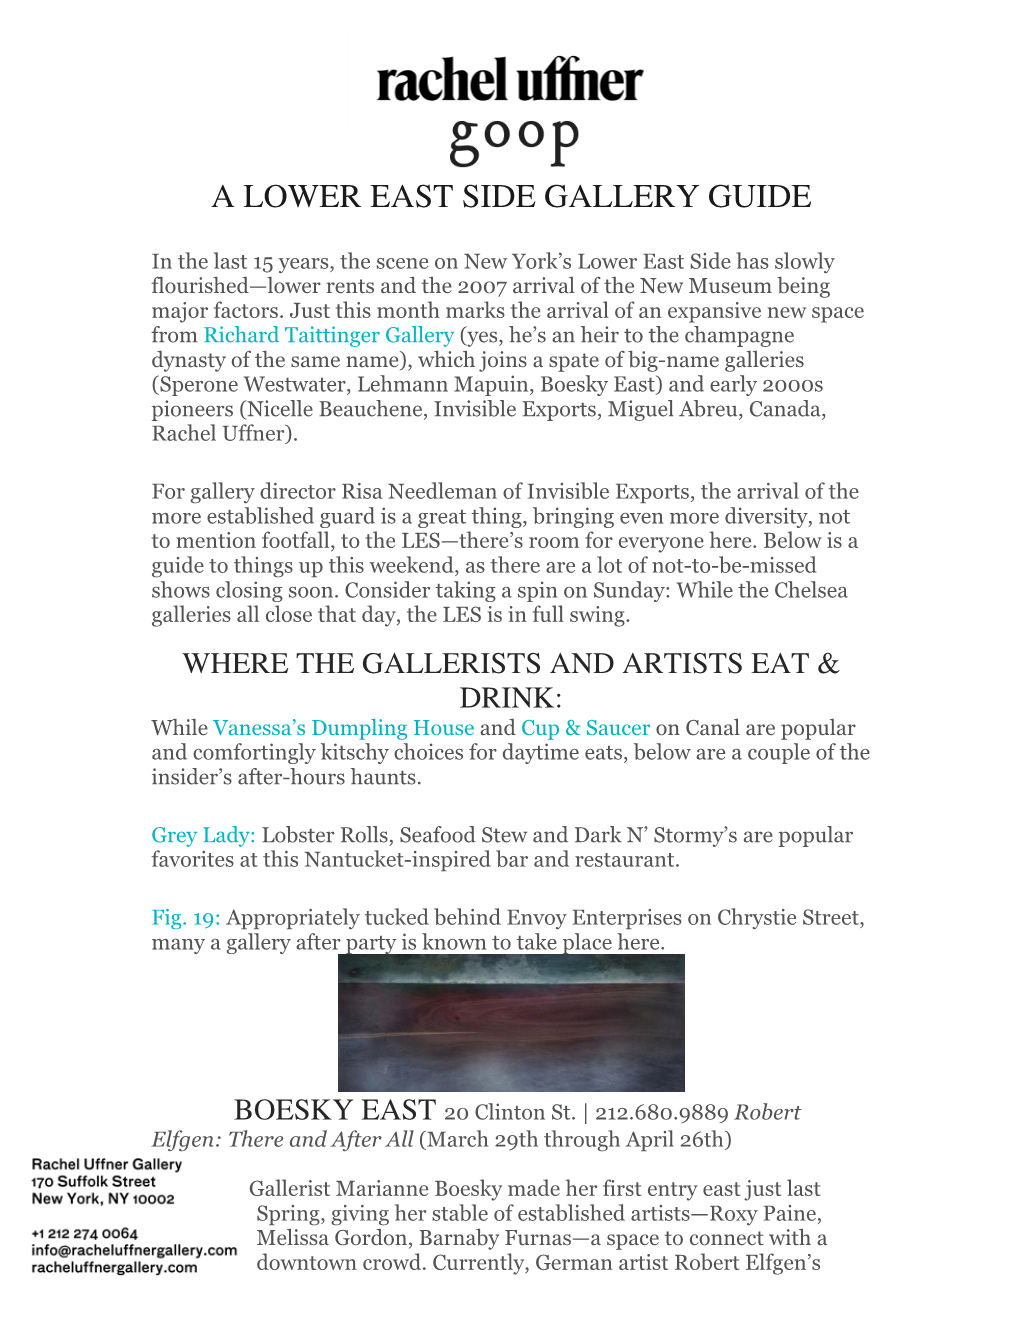 A Lower East Side Gallery Guide